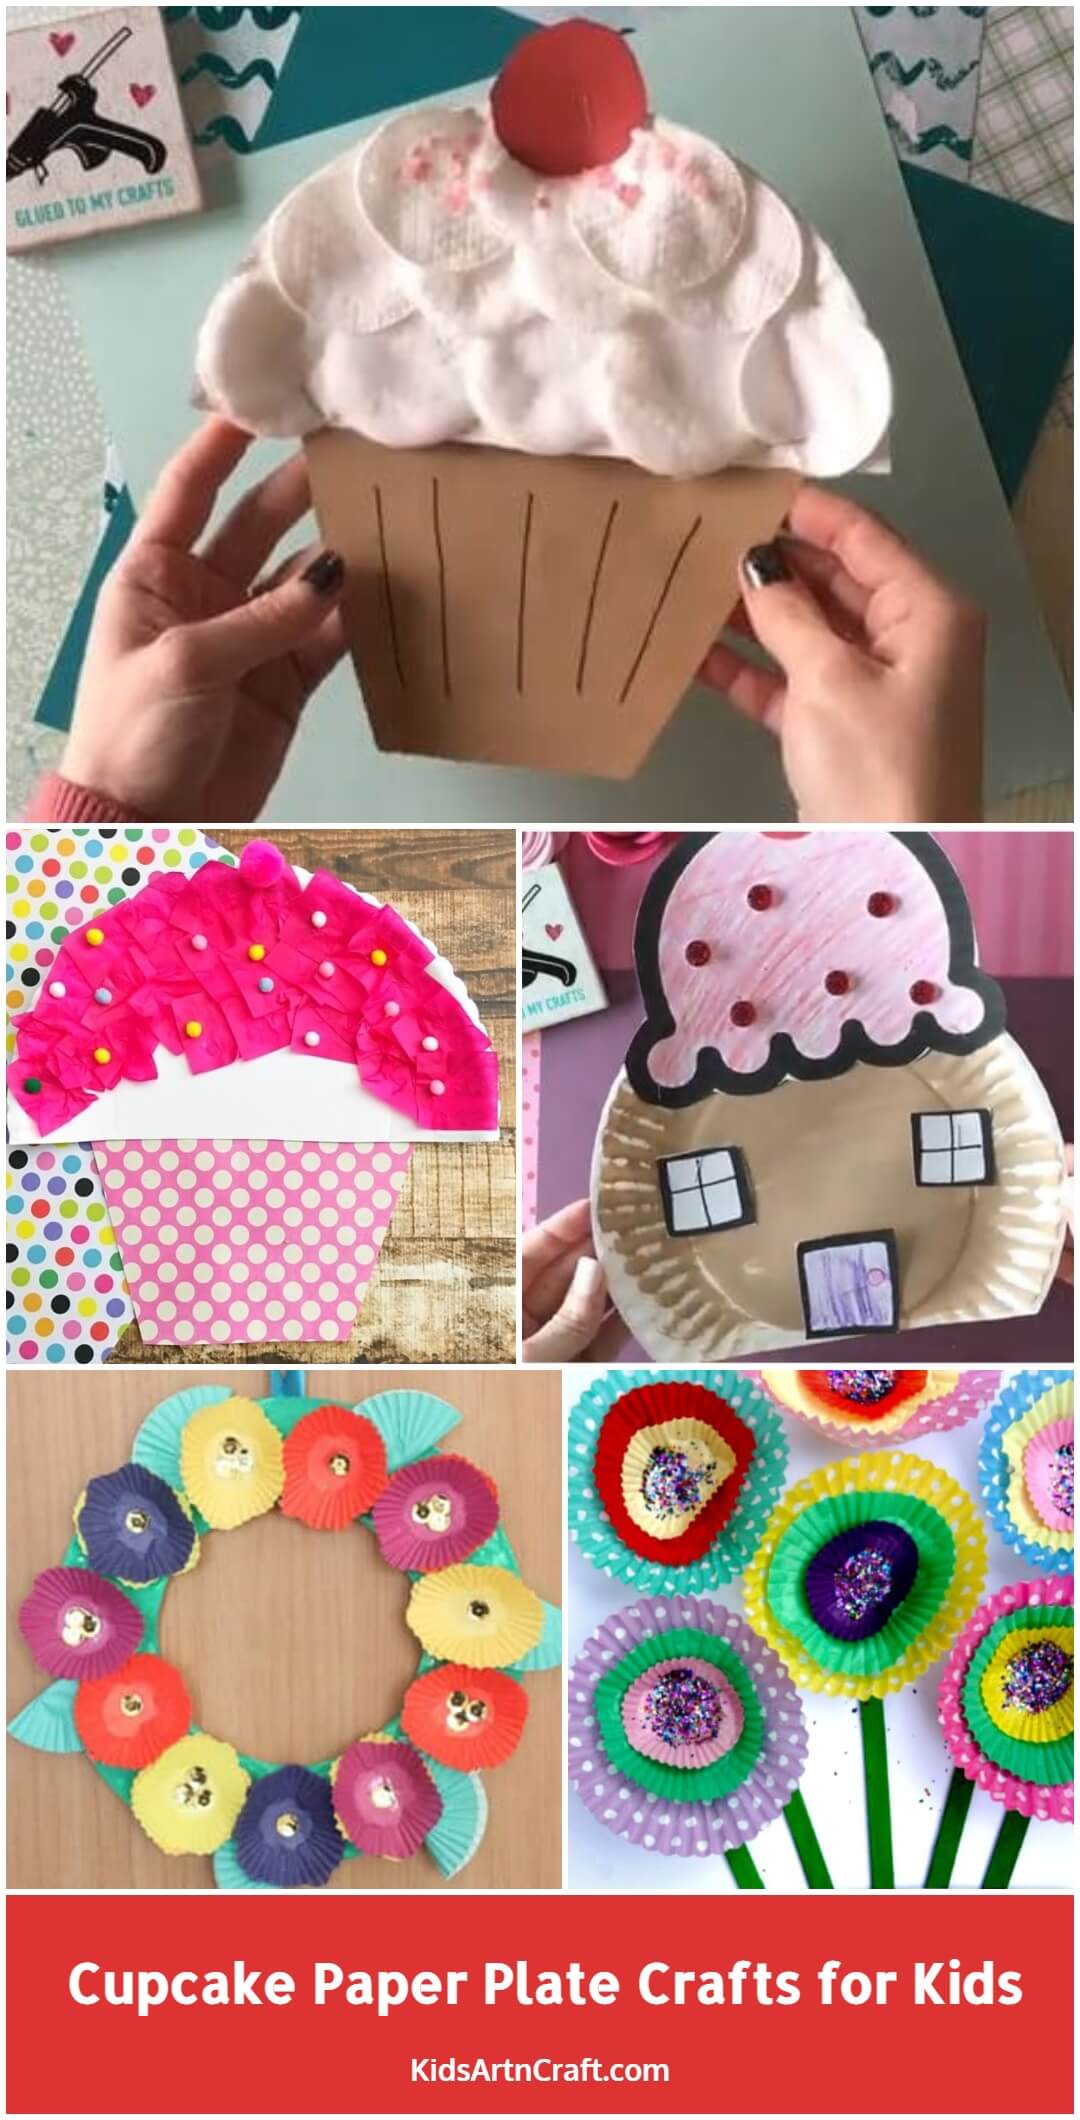 Cupcake Paper Plate Crafts for Kids